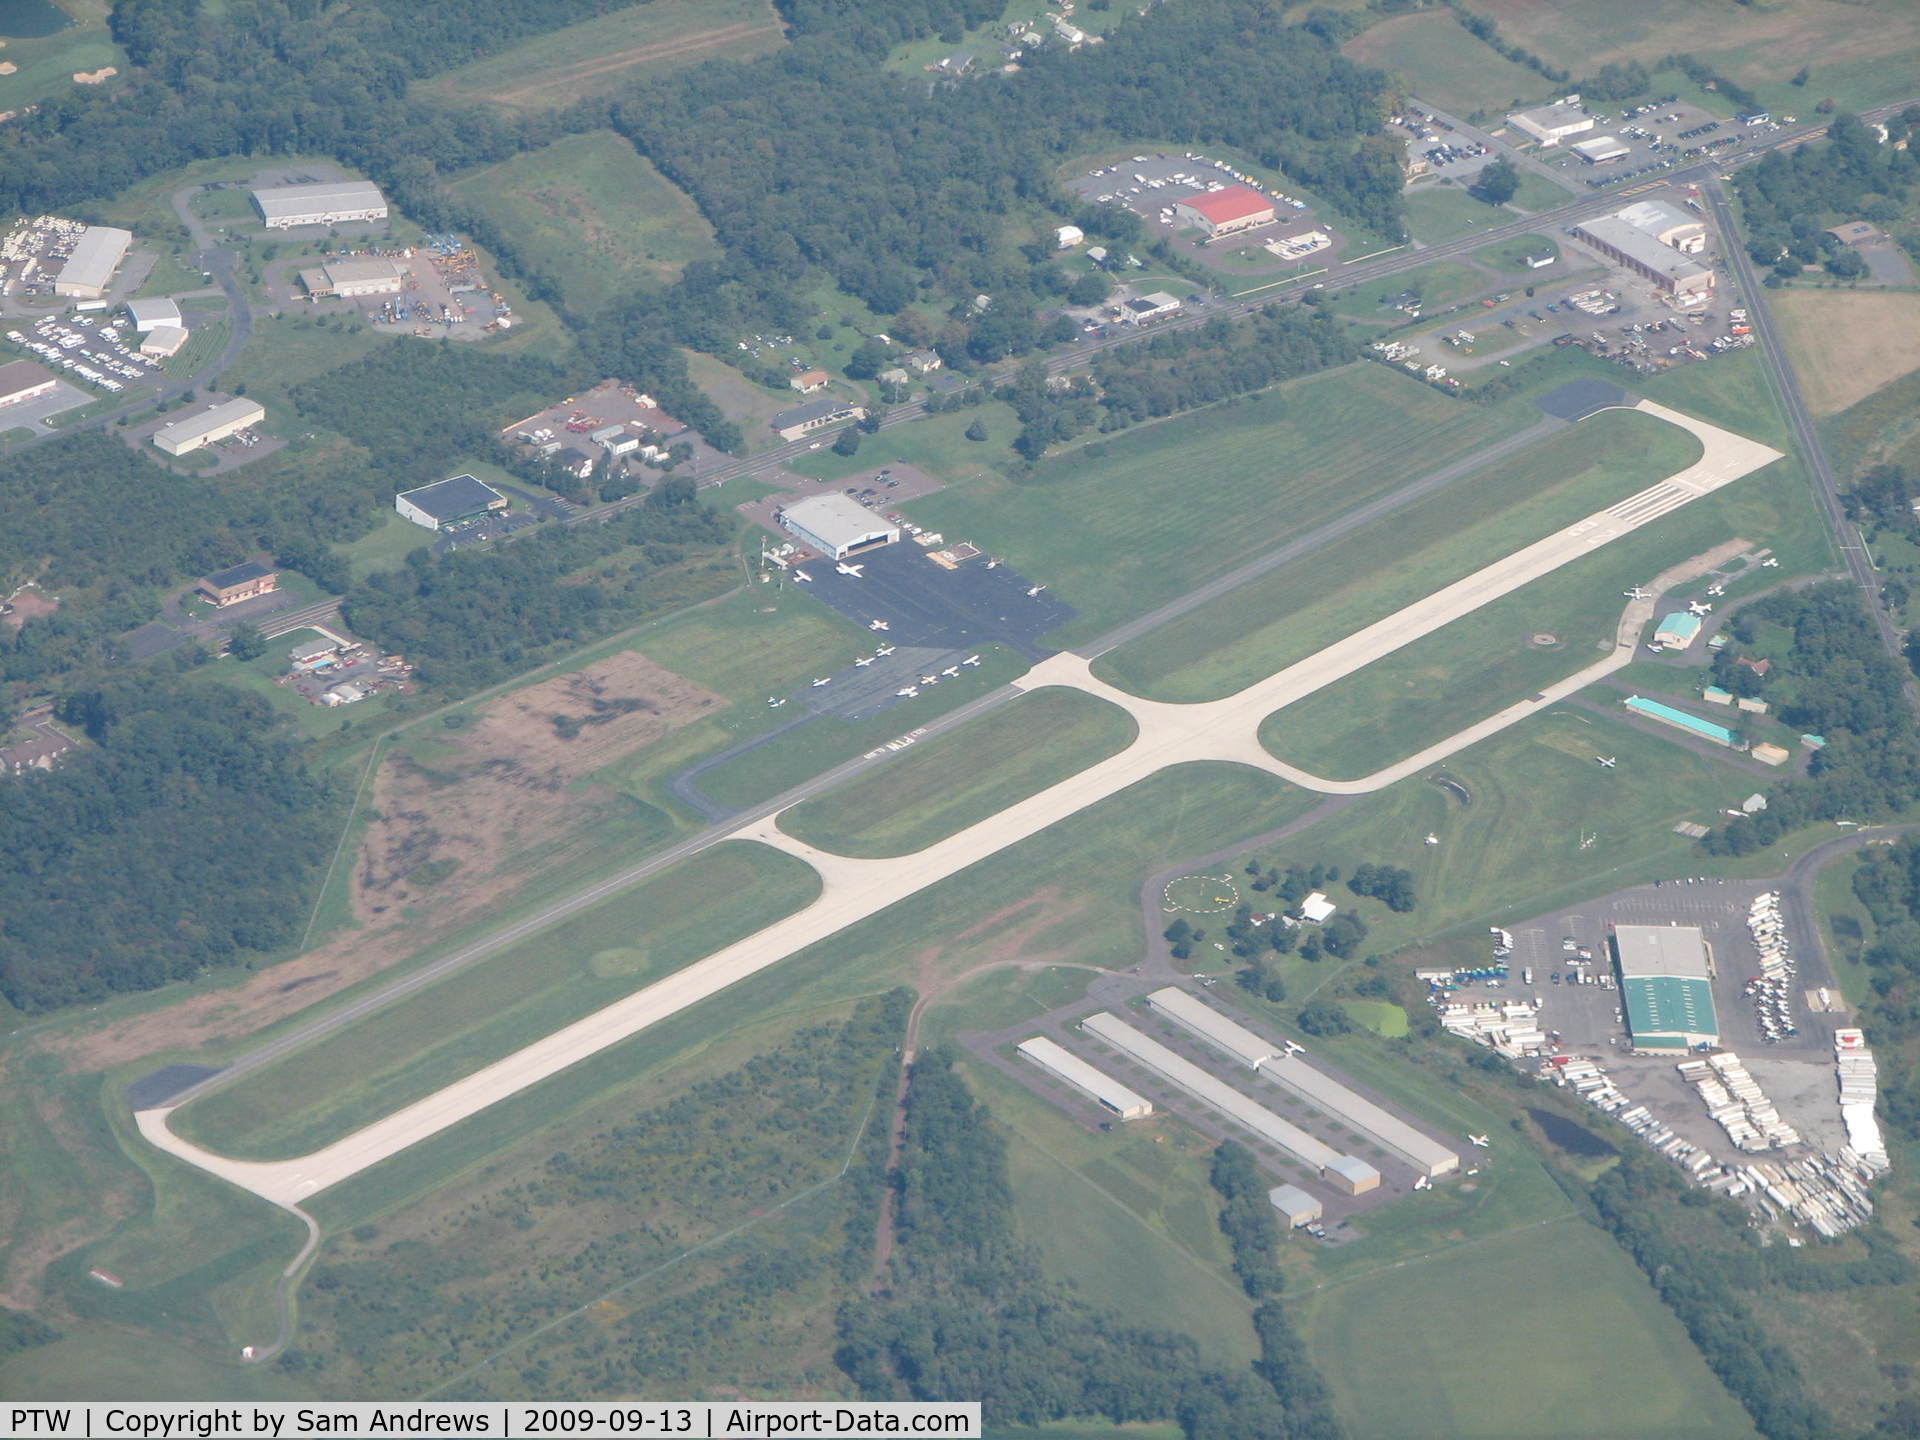 Heritage Field Airport (PTW) - Flying home from the Brandywine Fly-in.